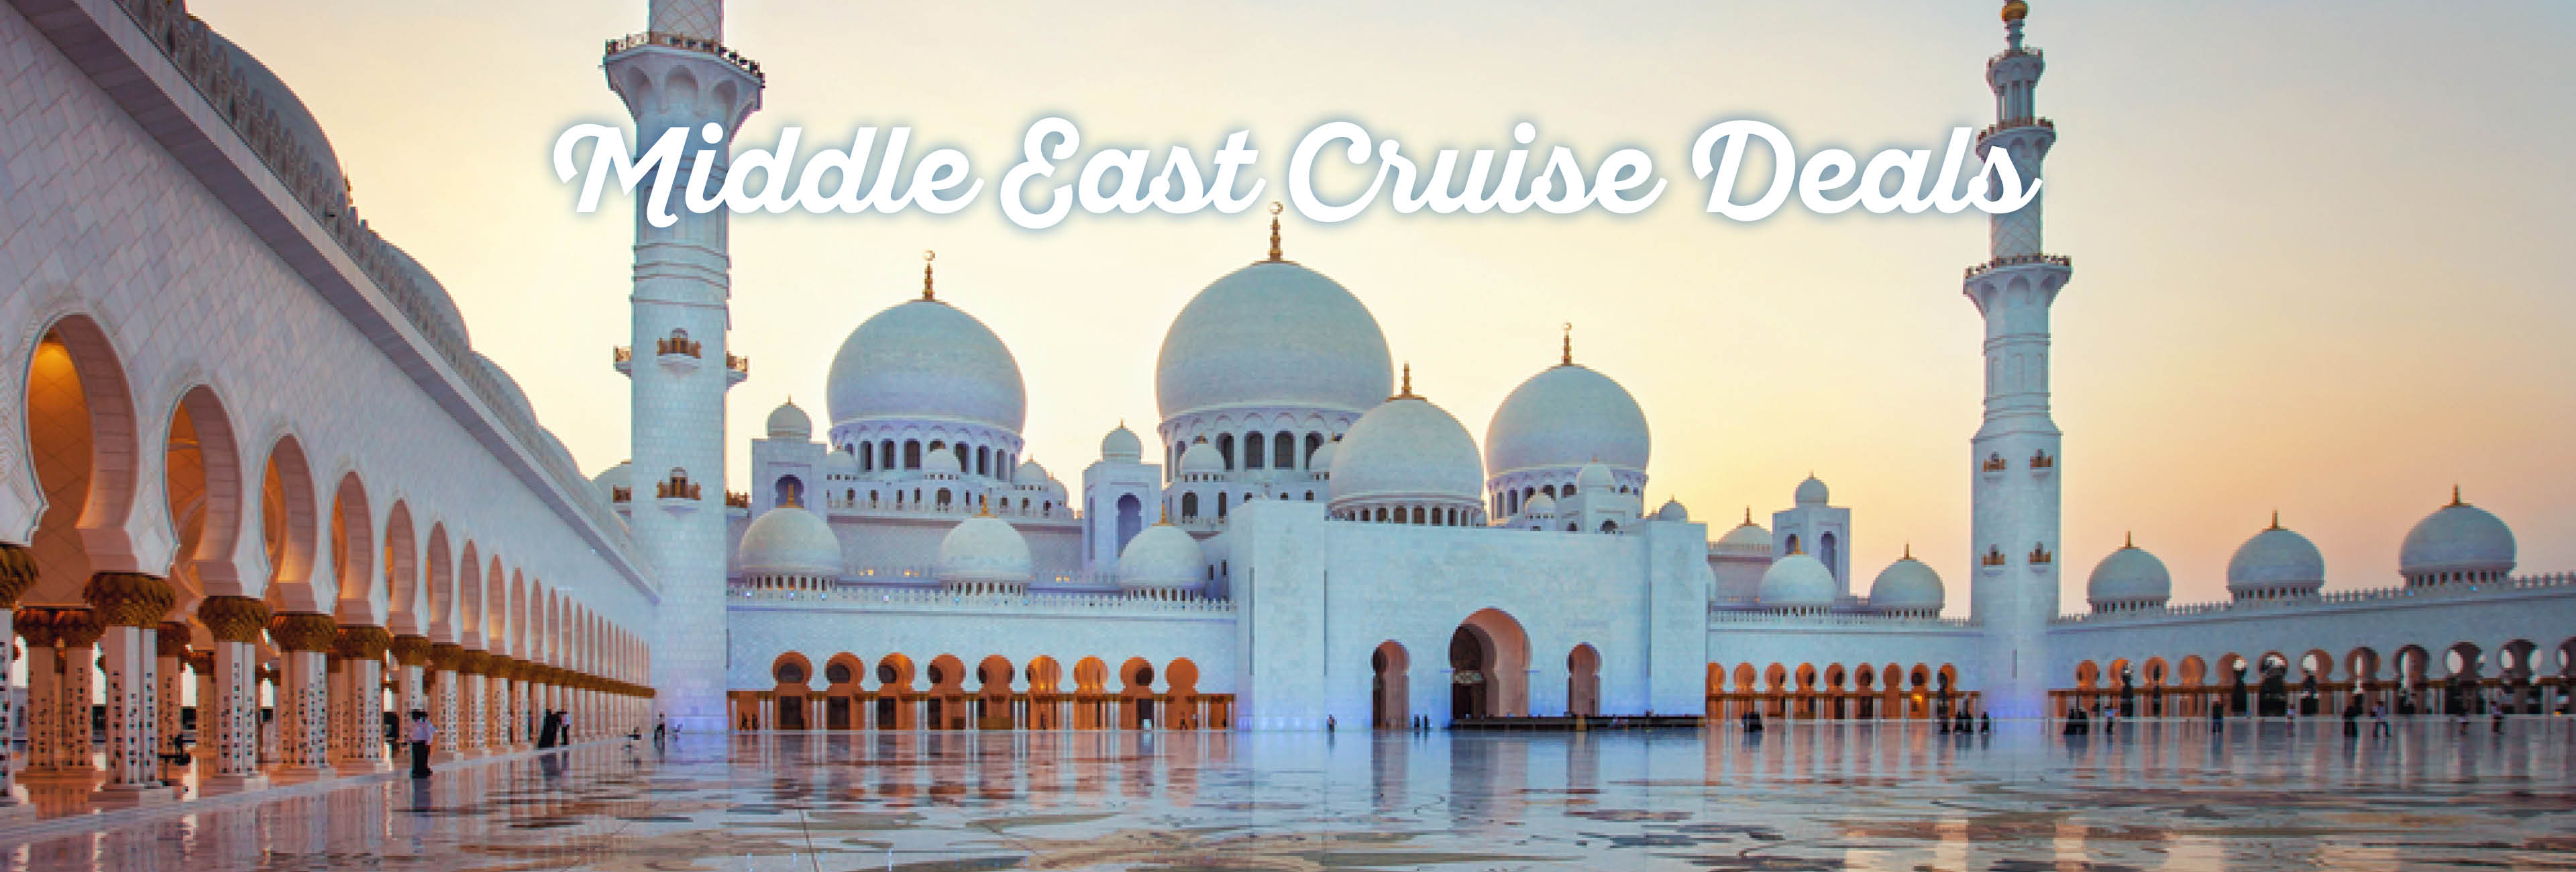 middle-east-cruise-deals-1.jpg